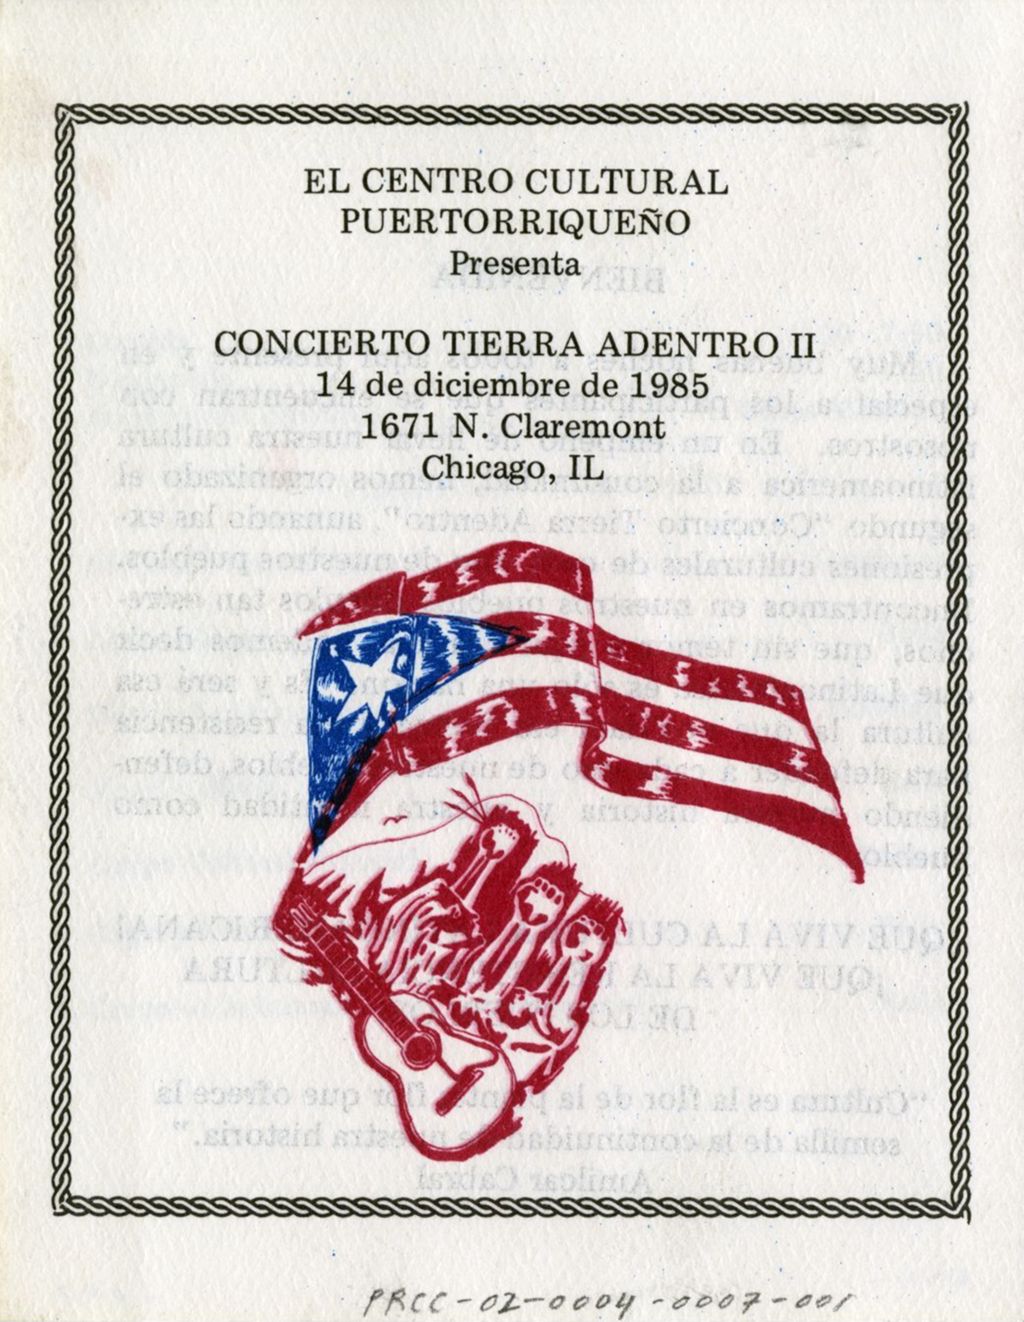 Miniature of Concert at the Puerto Rican Cultural Center